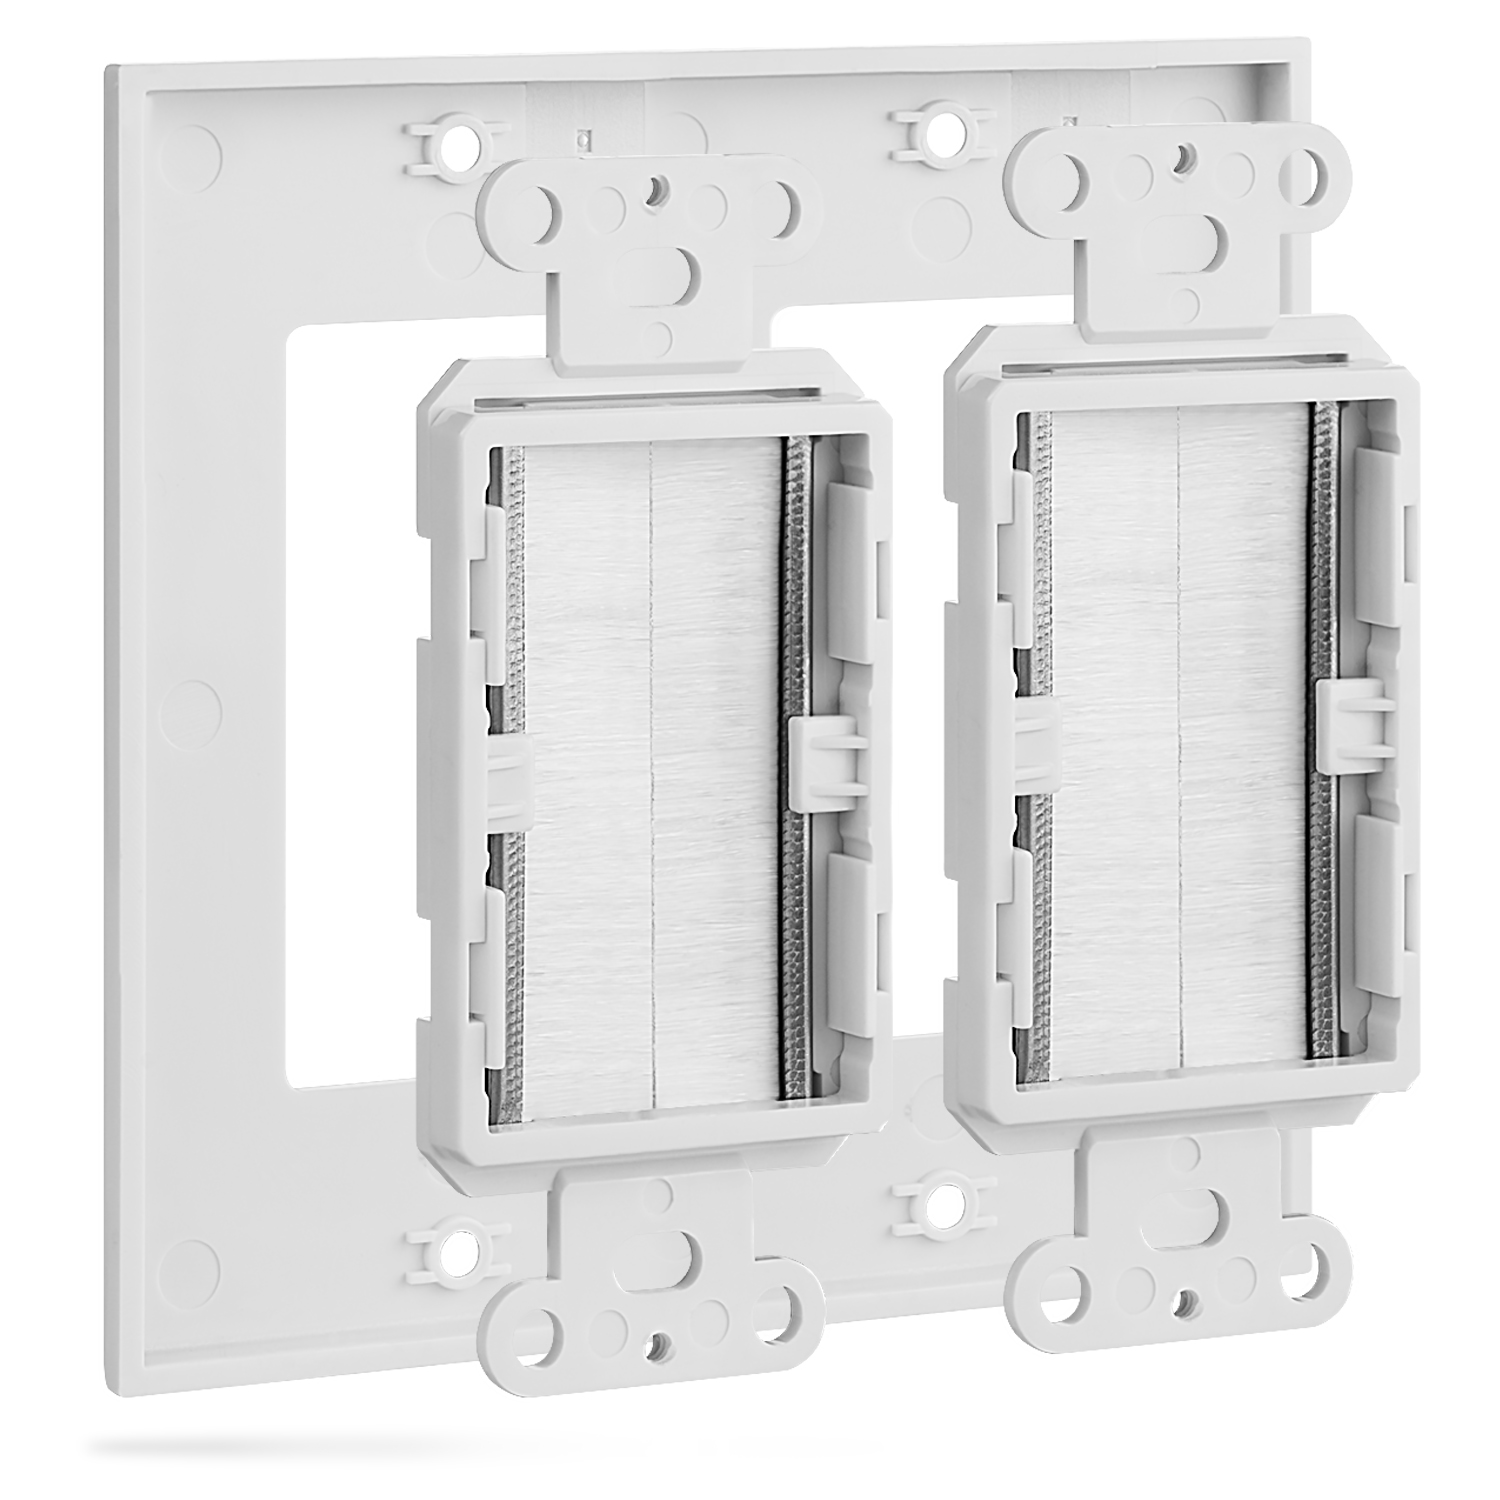 Fosmon 2-Gang Wall Plate, Brush Style Opening Passthrough Low Voltage Cable Plate in-Wall Installation for Speaker Wires, Coaxial Cables, HDMI Cables, or Network/Phone Cables - image 4 of 8